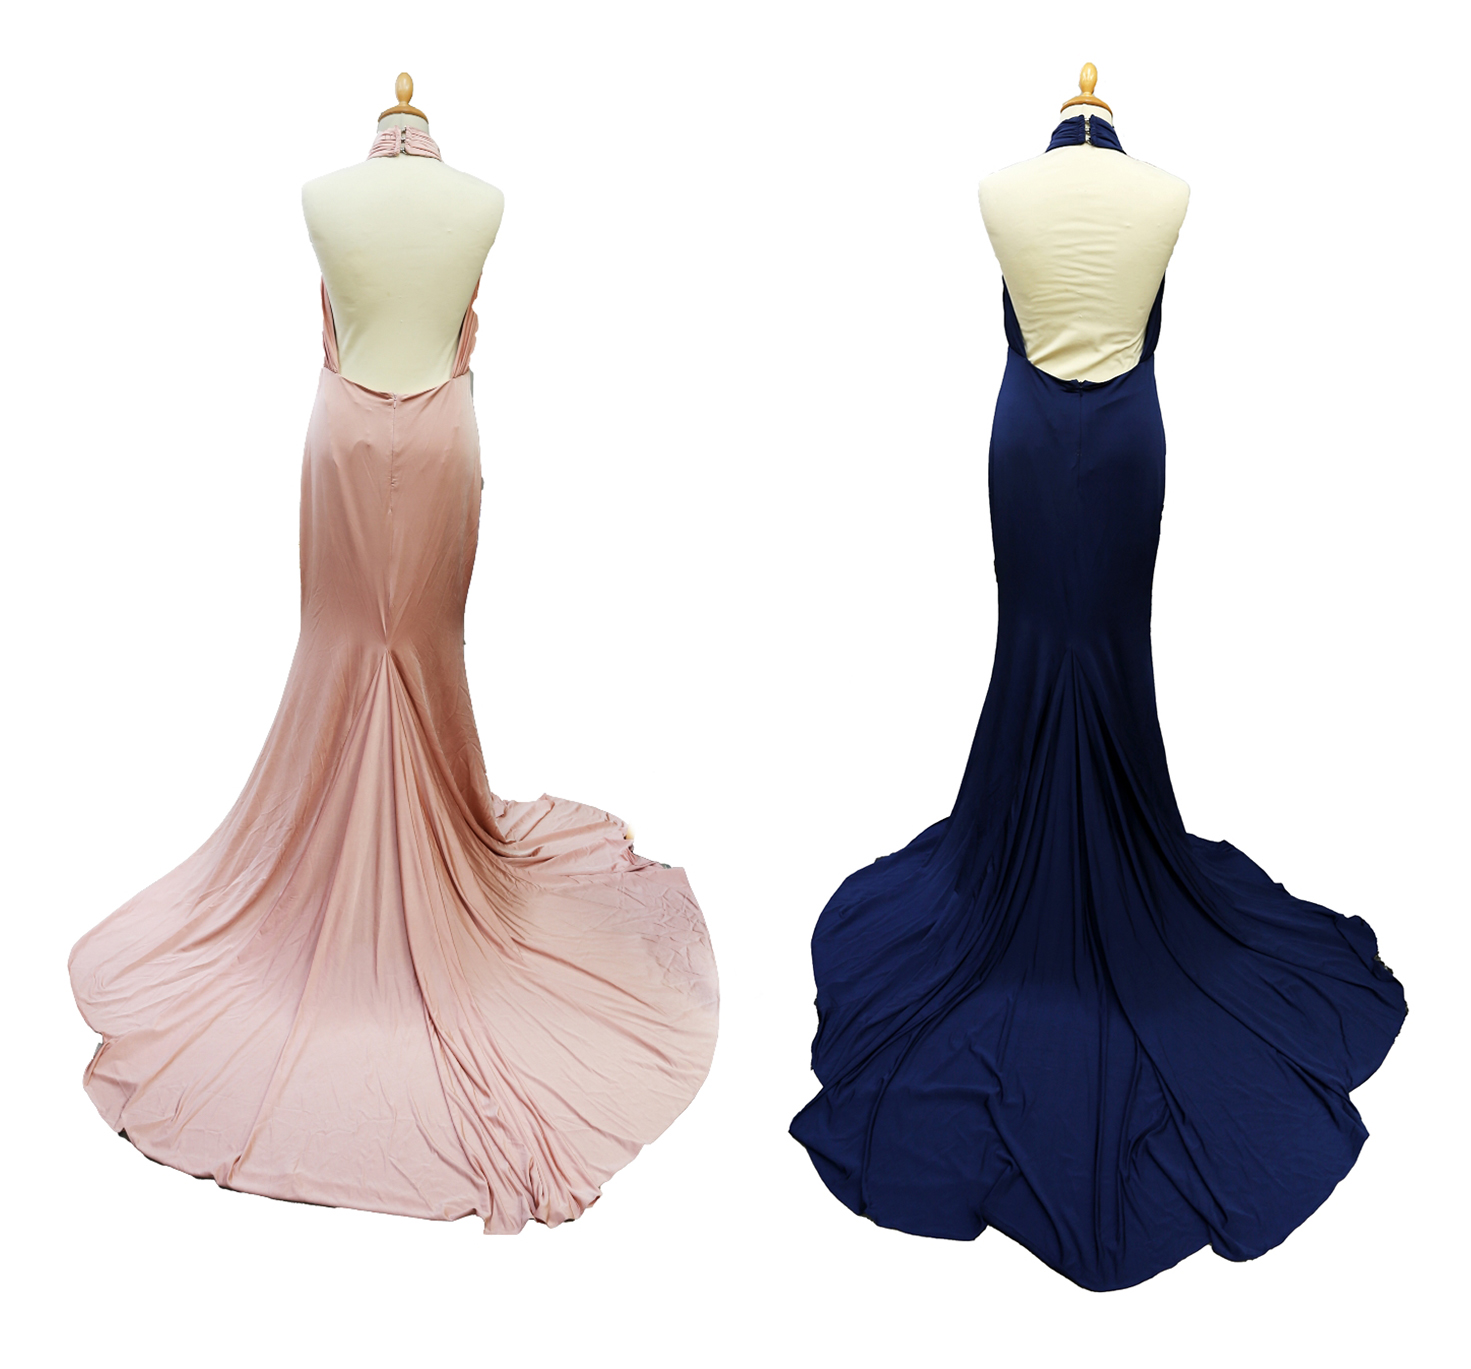 4 salmon pink Goddiva evening/prom/bridesmaid dresses, brand new with tags, 2 x size 12 and 2 x size - Image 2 of 10